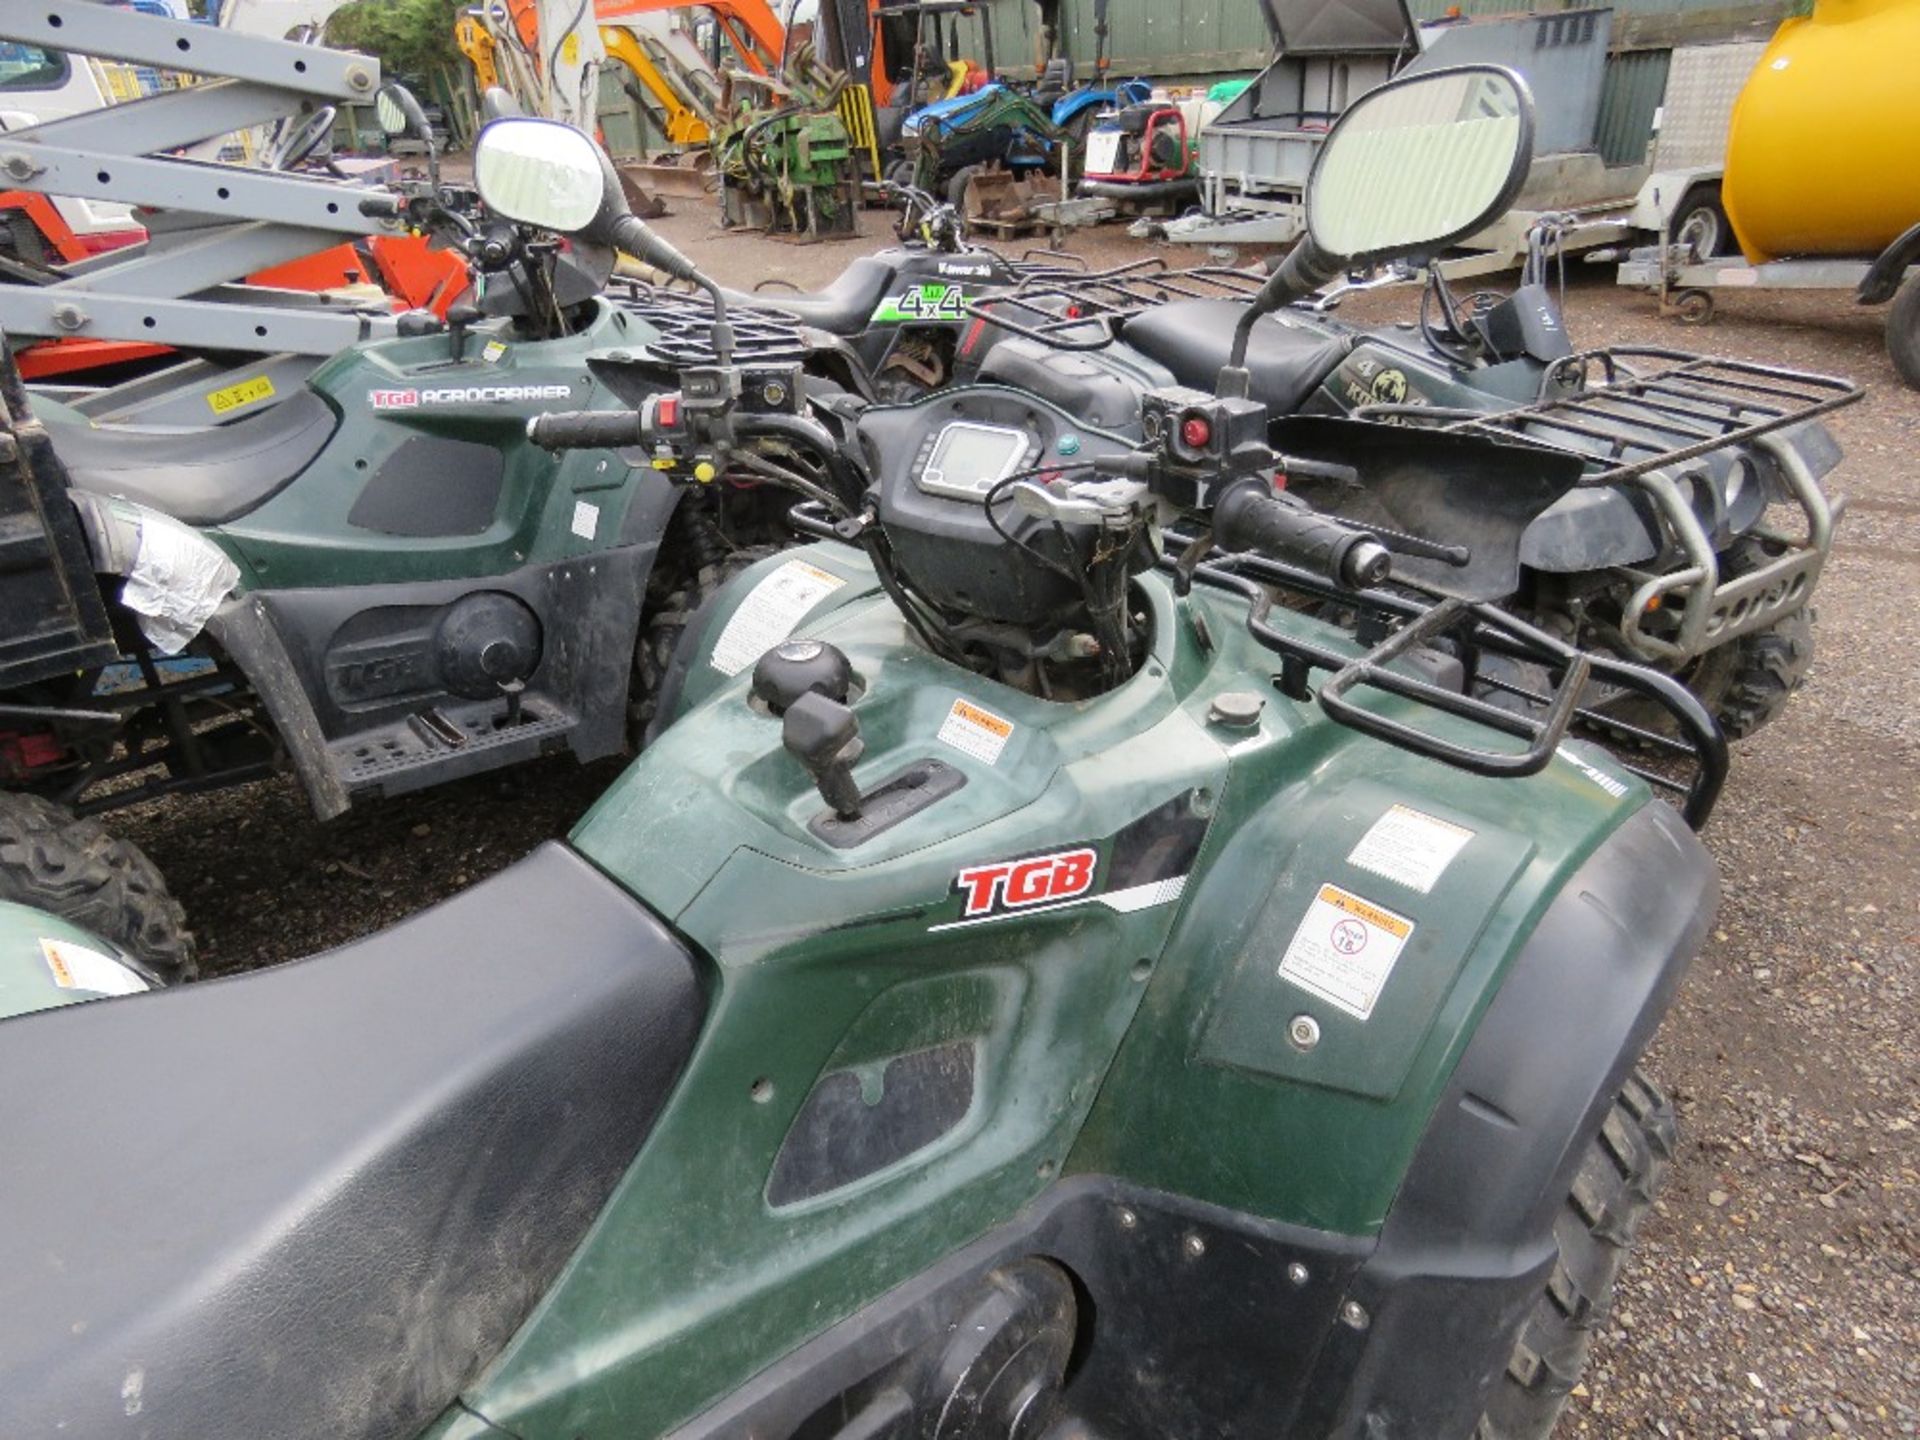 TGB 550 4WD QUAD BIKE, 2547 REC MILES, SUPPLIED NEW IN MAY 2018. WHEN TESTED WAS SEEN TO DRIVE, STE - Image 3 of 5